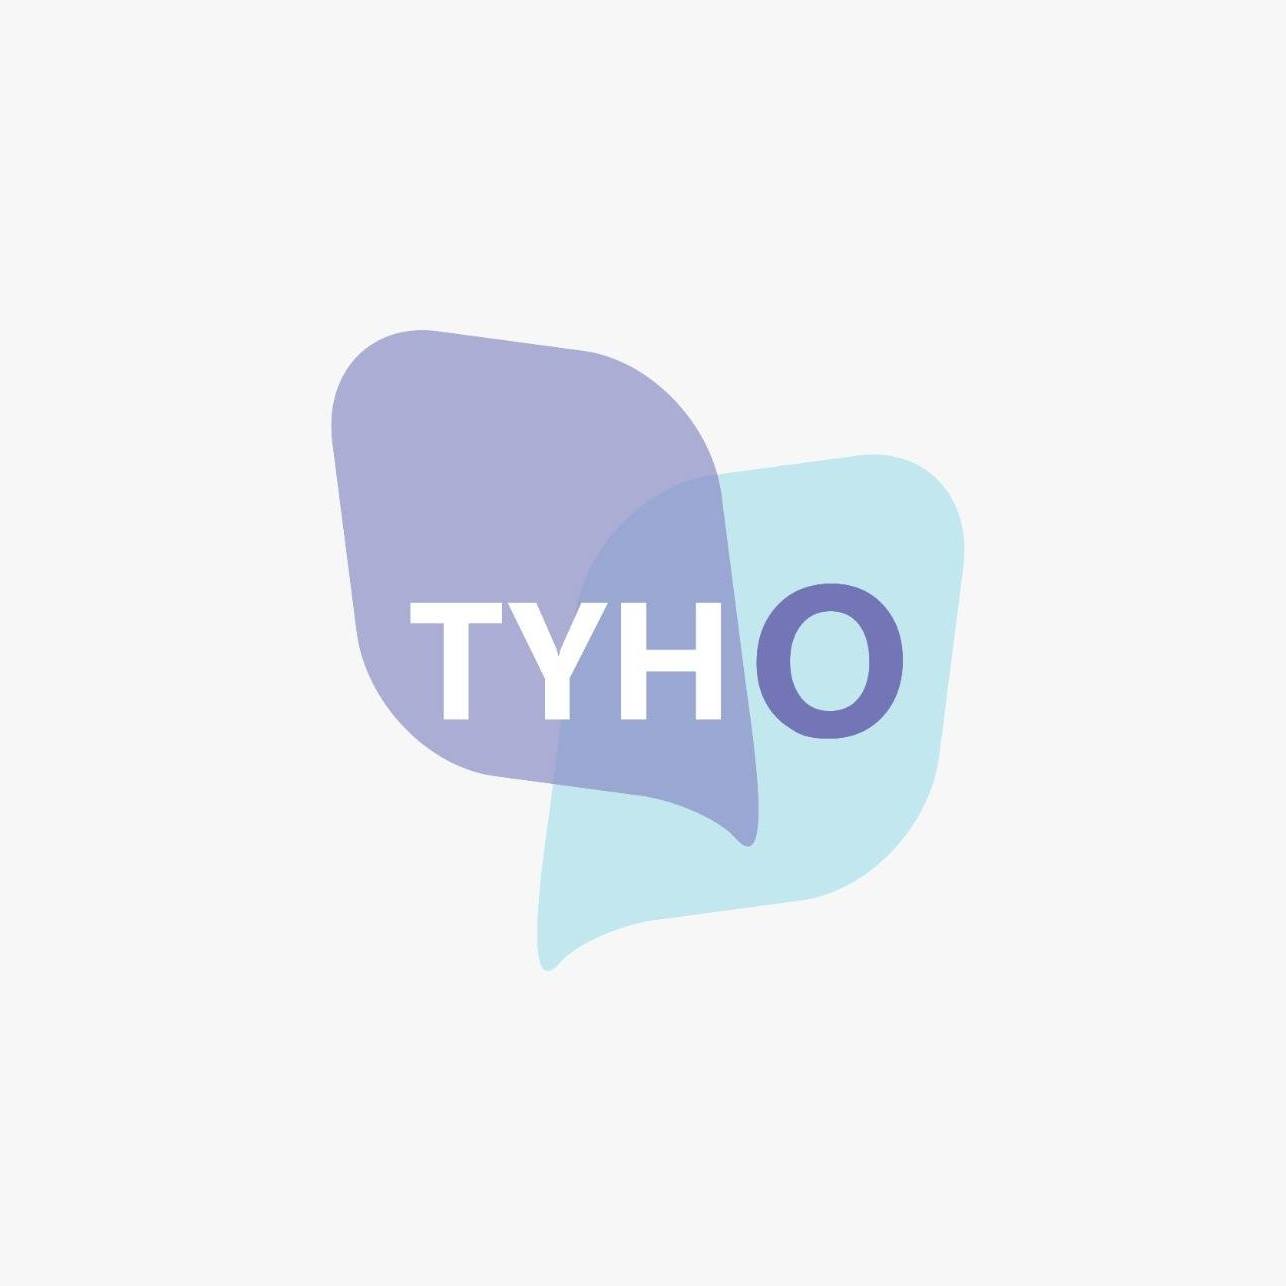 Talk Your Heart Out (TYHO)